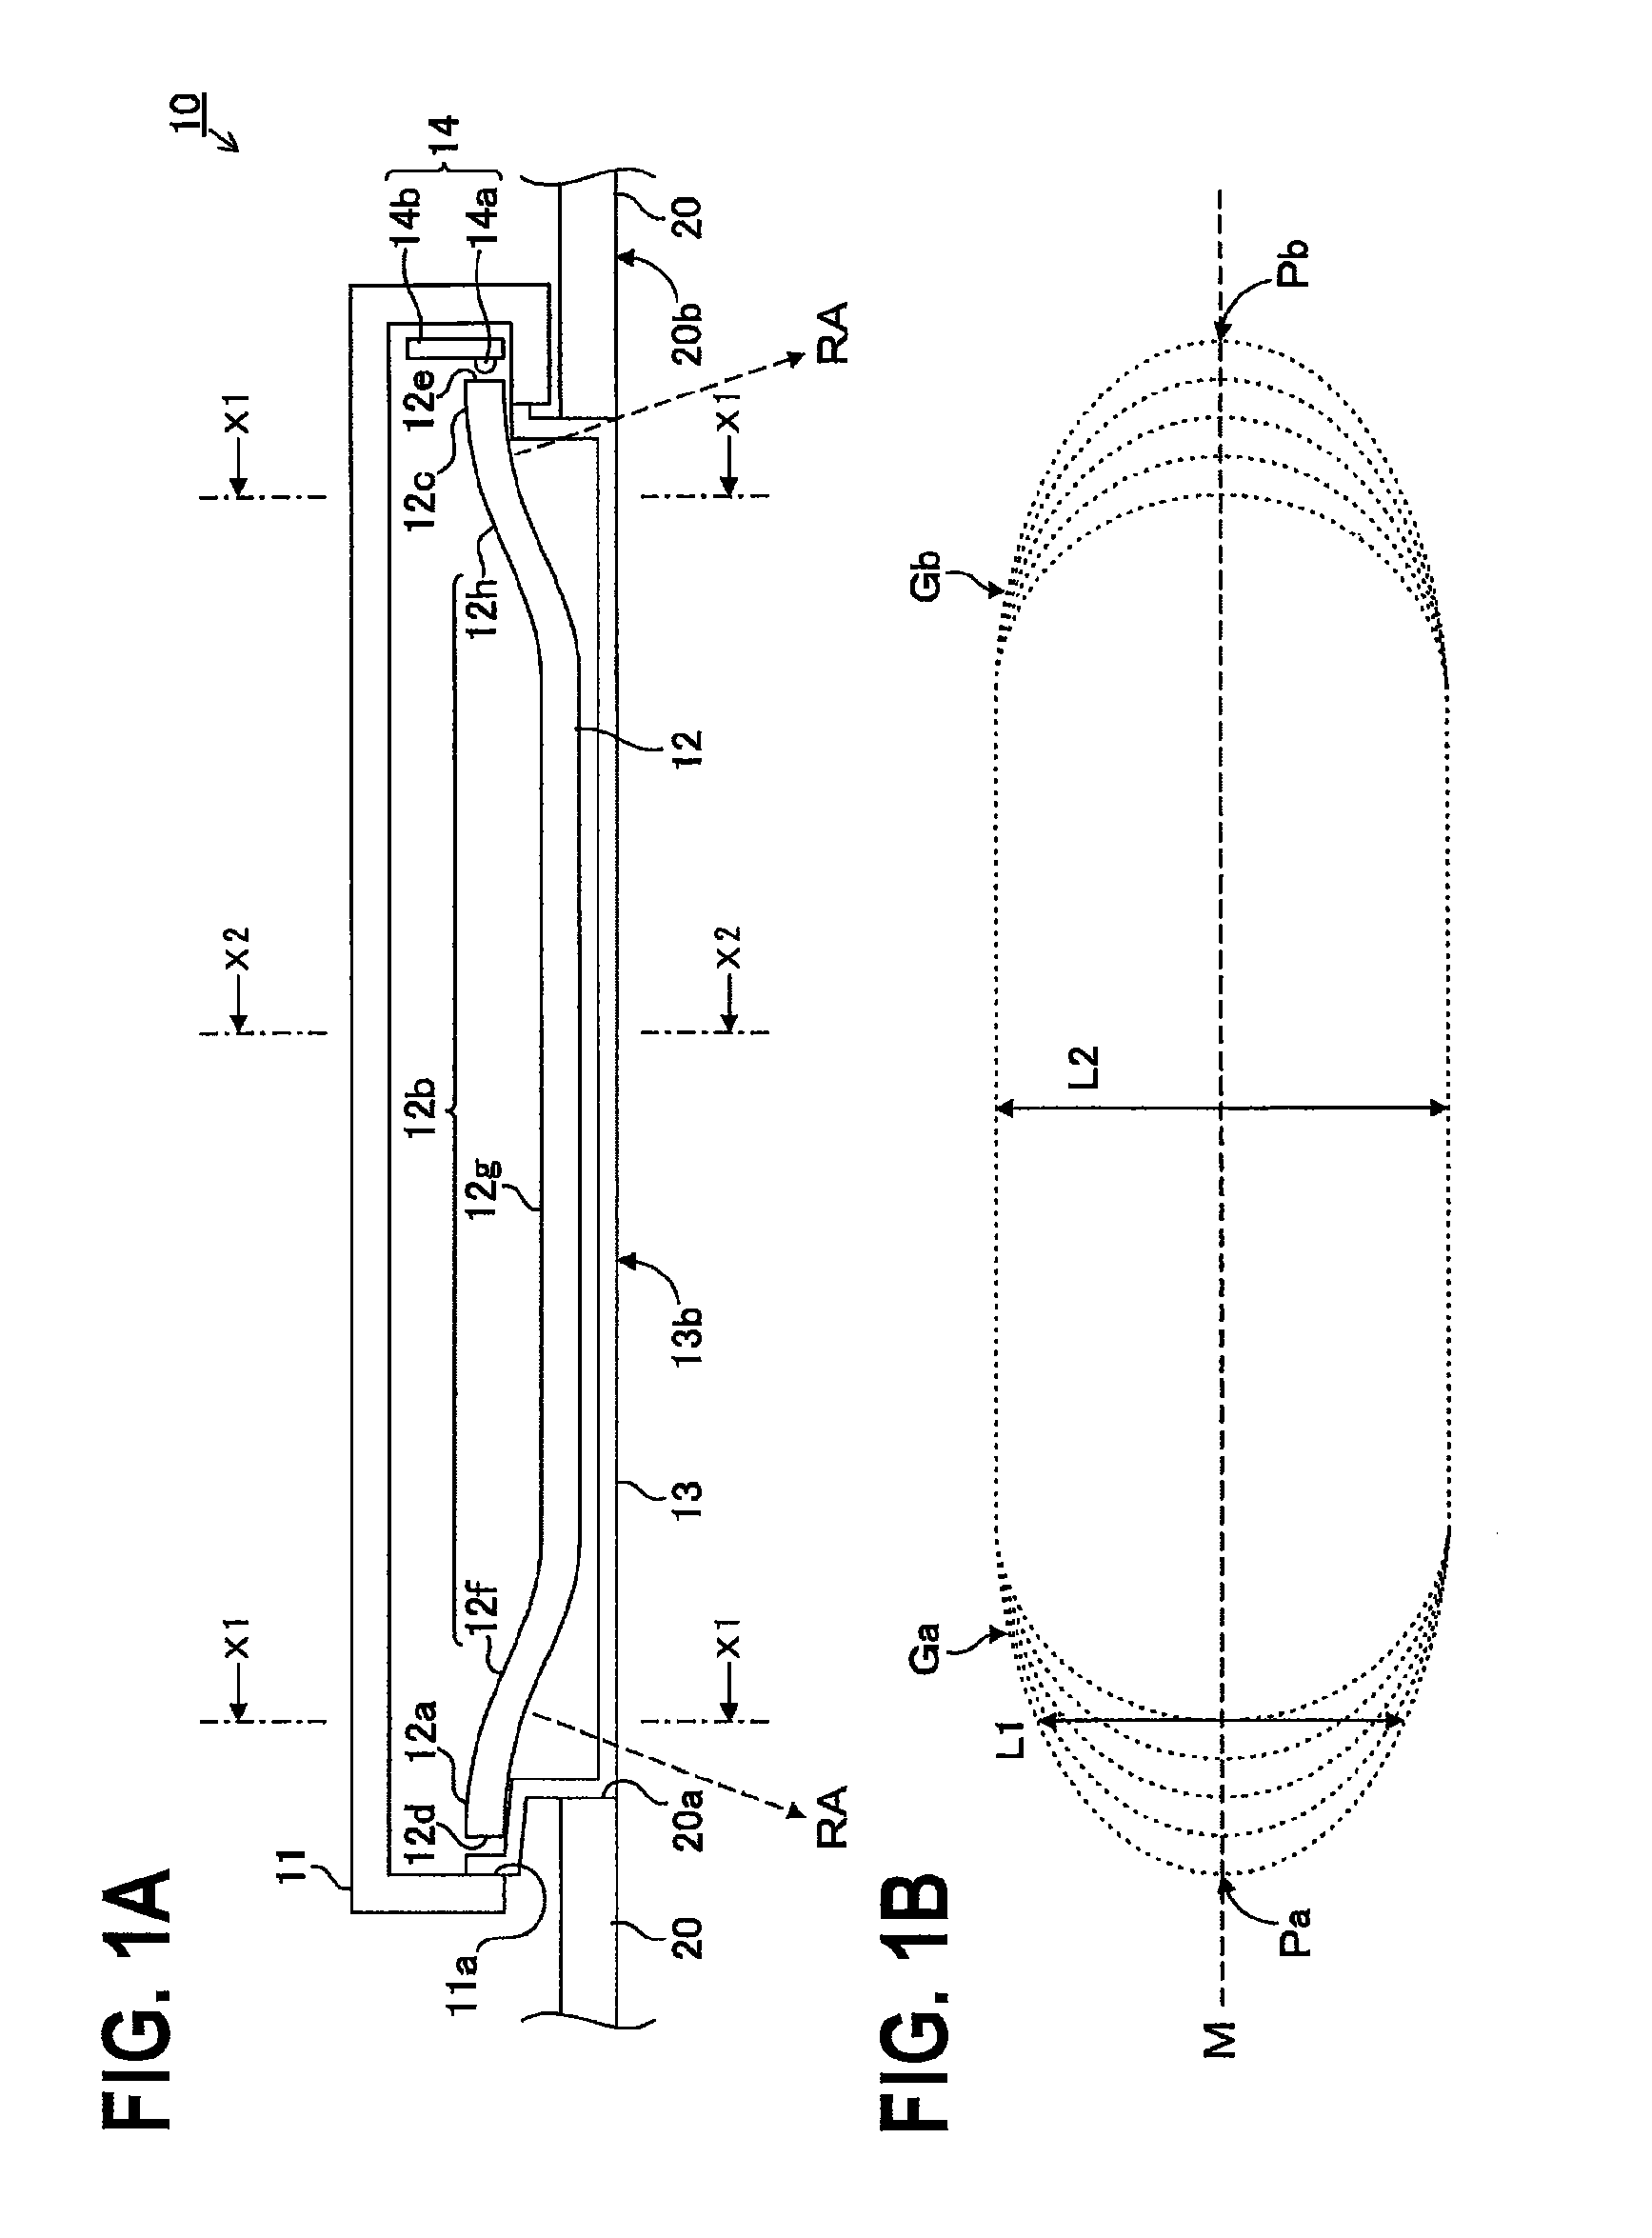 Illumination apparatus with curved light guide